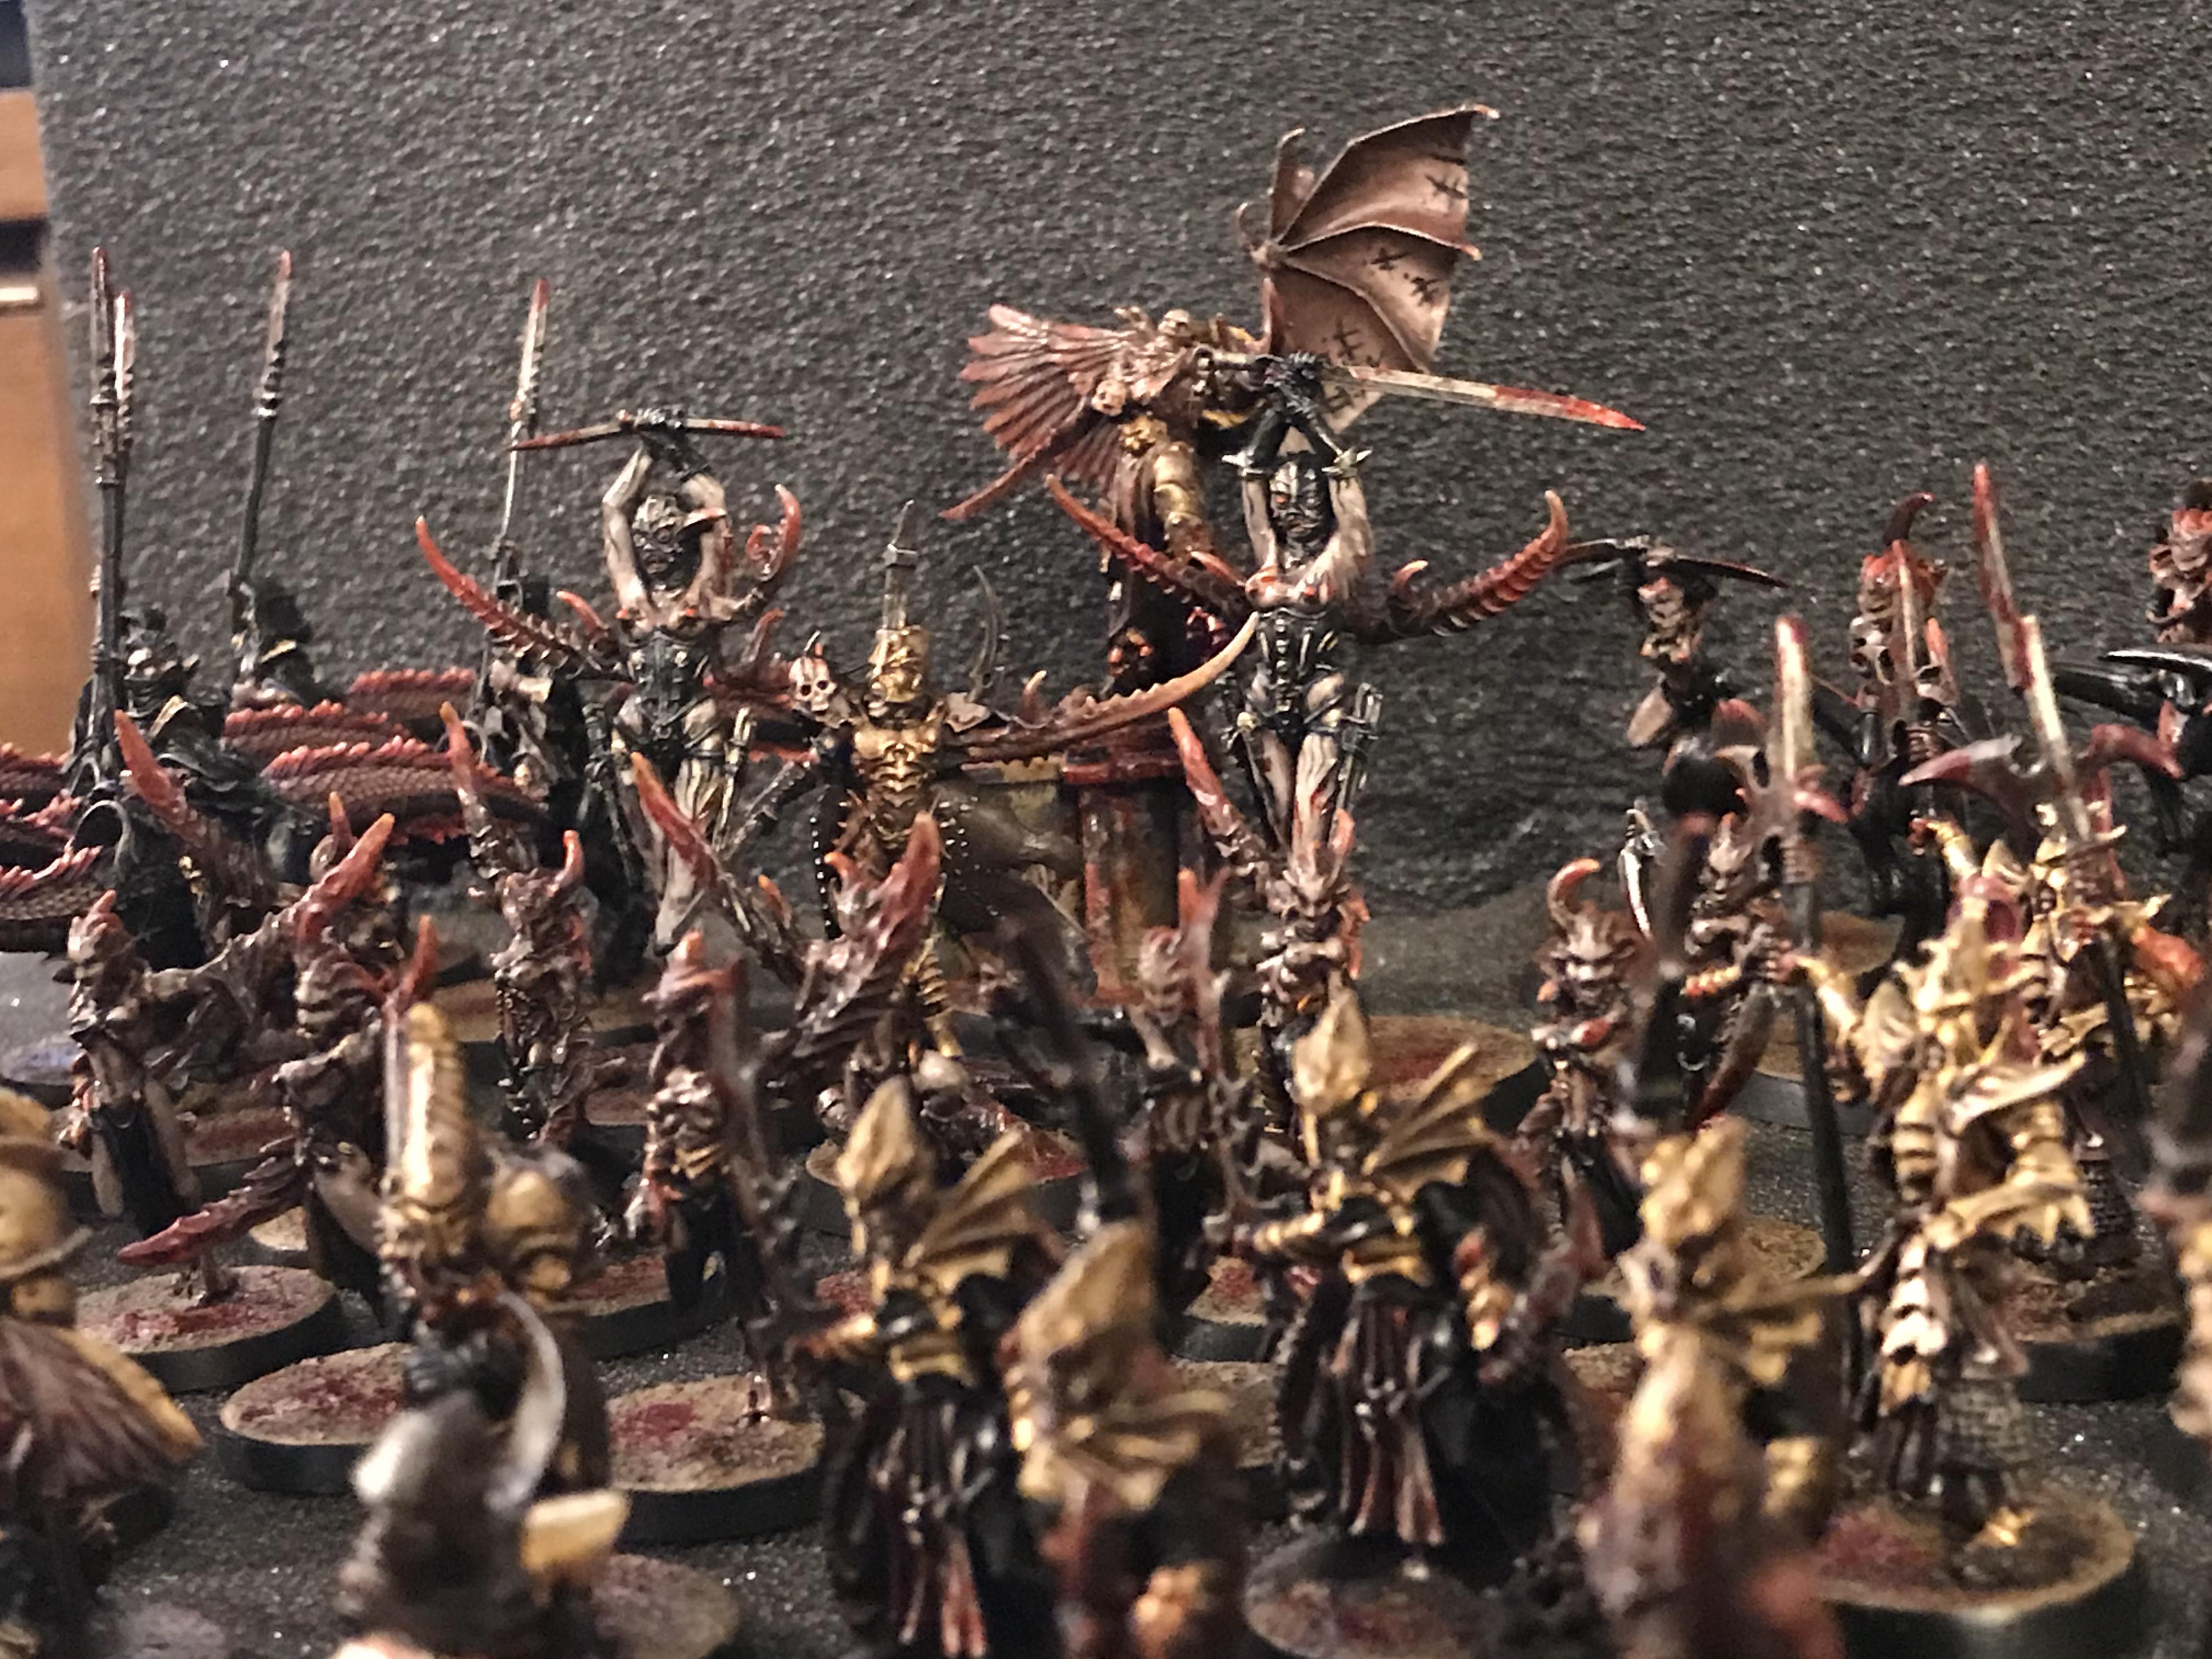 Aef, Aelves, Age, Agony, Aos28, Army, Battle, Chaos, Cosmic, Cult, Cultists, Daemonic, Daemons, Dark, Darkness, Decadence, Druchii, Eldritch, Elves, Excess, Gold, Golden, Horrors, Misery, Mordheim, Of, Pain, Pleasure, Progress, Project, Red, Rising, Sigmar, Slaanesh, Slaves, Sun, To, Torture, Warband, Warhammer Fantasy